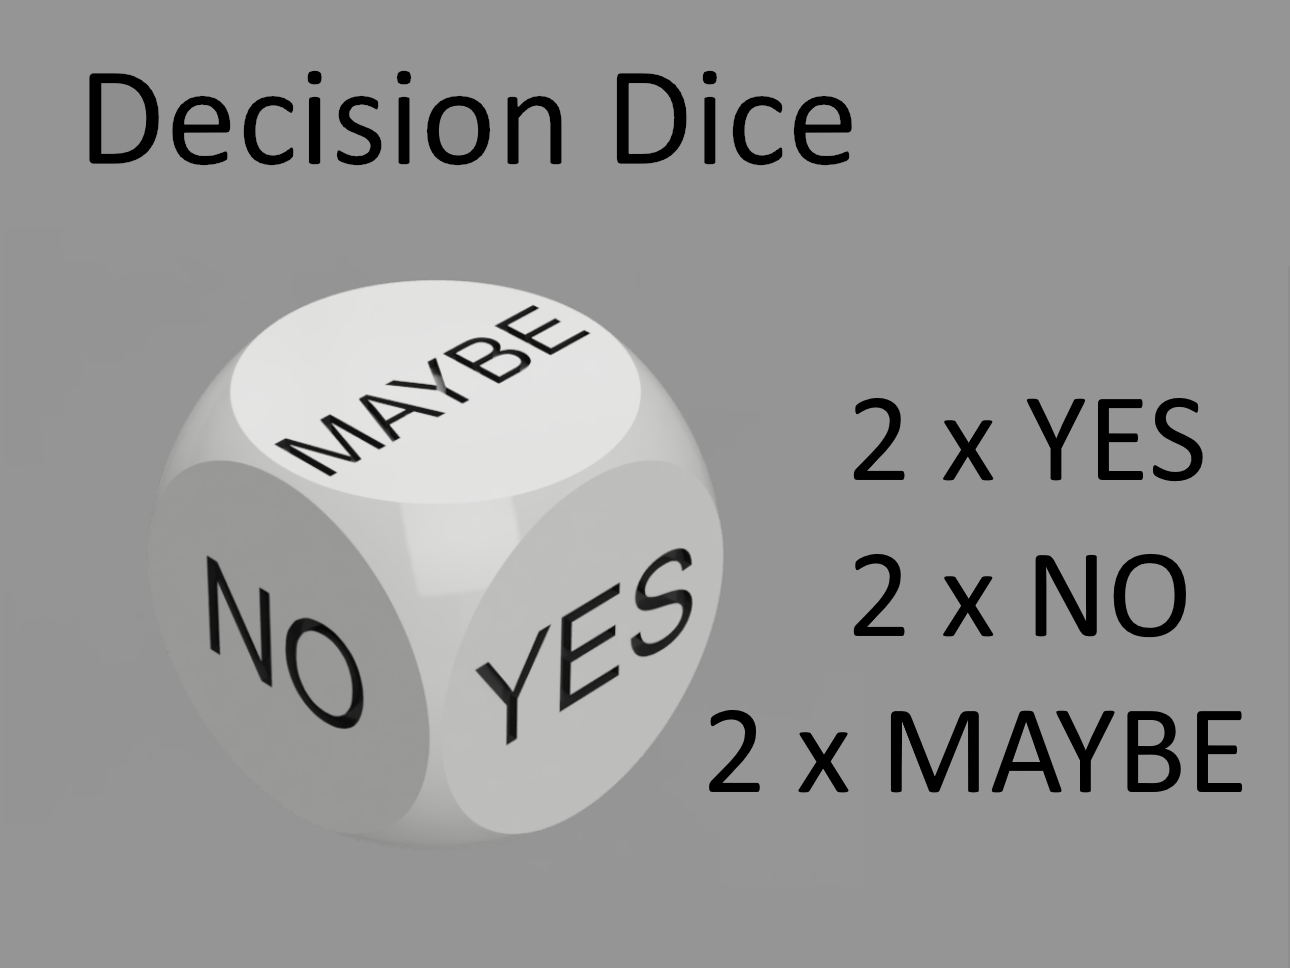 Yes No Maybe - Decision Dice